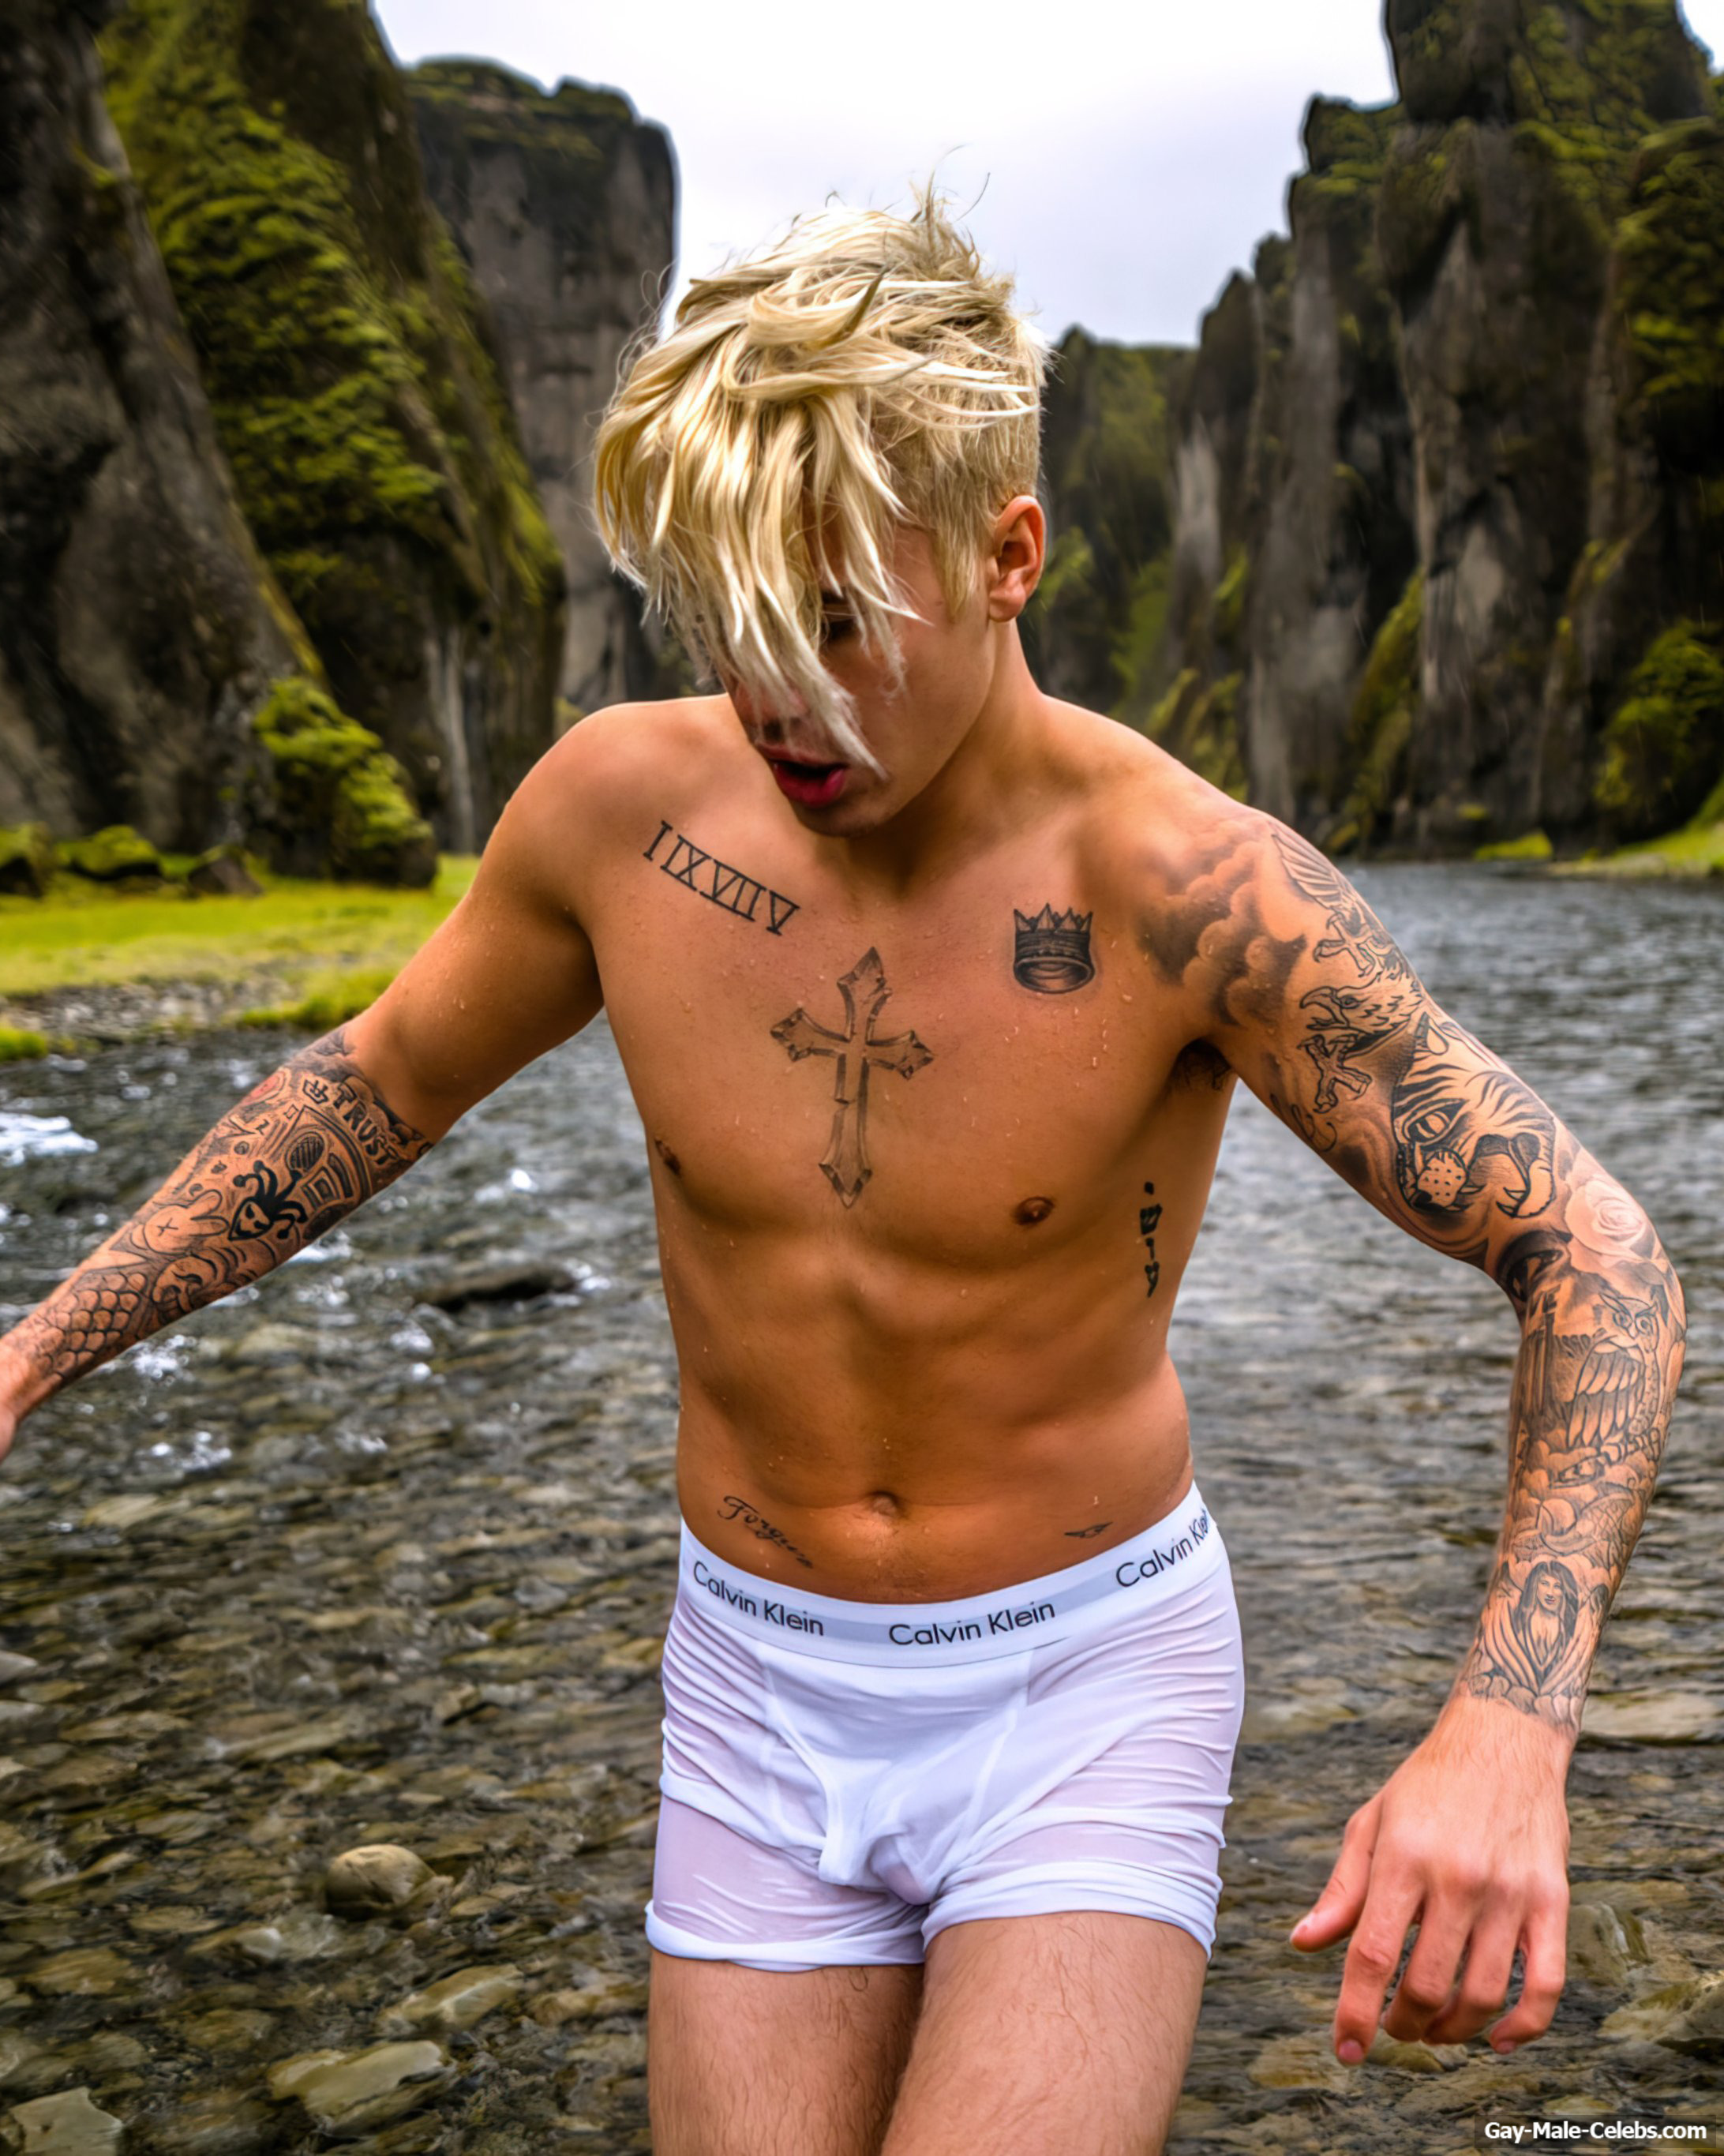 Justin Bieber Nude Celeb Dick And Tight Ass in UHQ